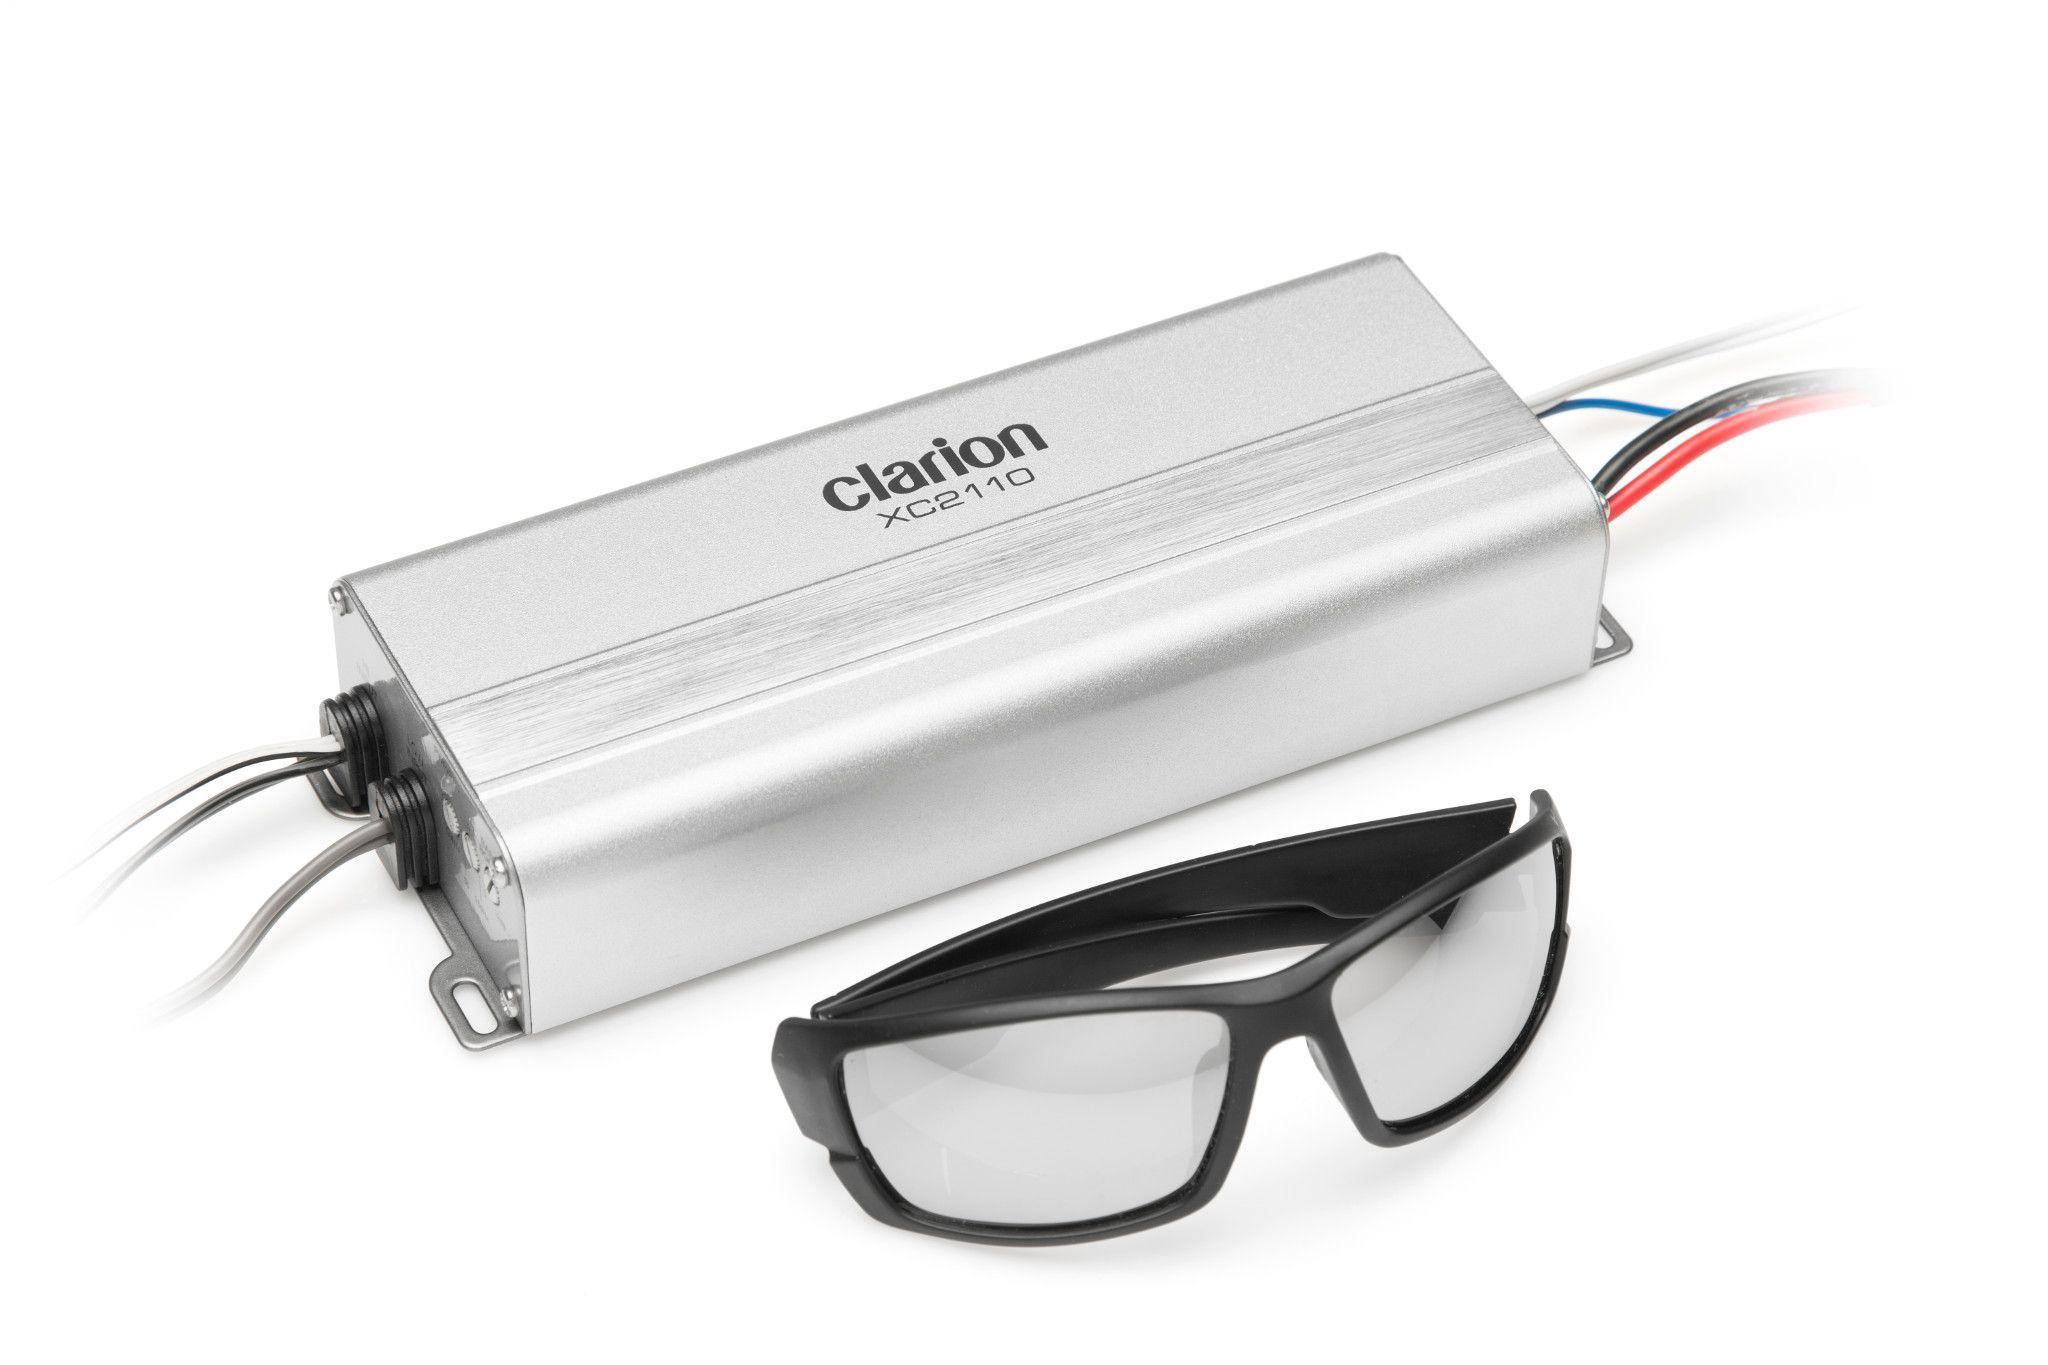 CLARION Compact Mono Subwoofer Amplifier – Rated Power (1% THD+N, 14.4V): 200W x 1 @ 4 ohms / 300W x 1 @ 2 ohms – Features: variable Low-Pass Filter and variable Bass Boost | 92762